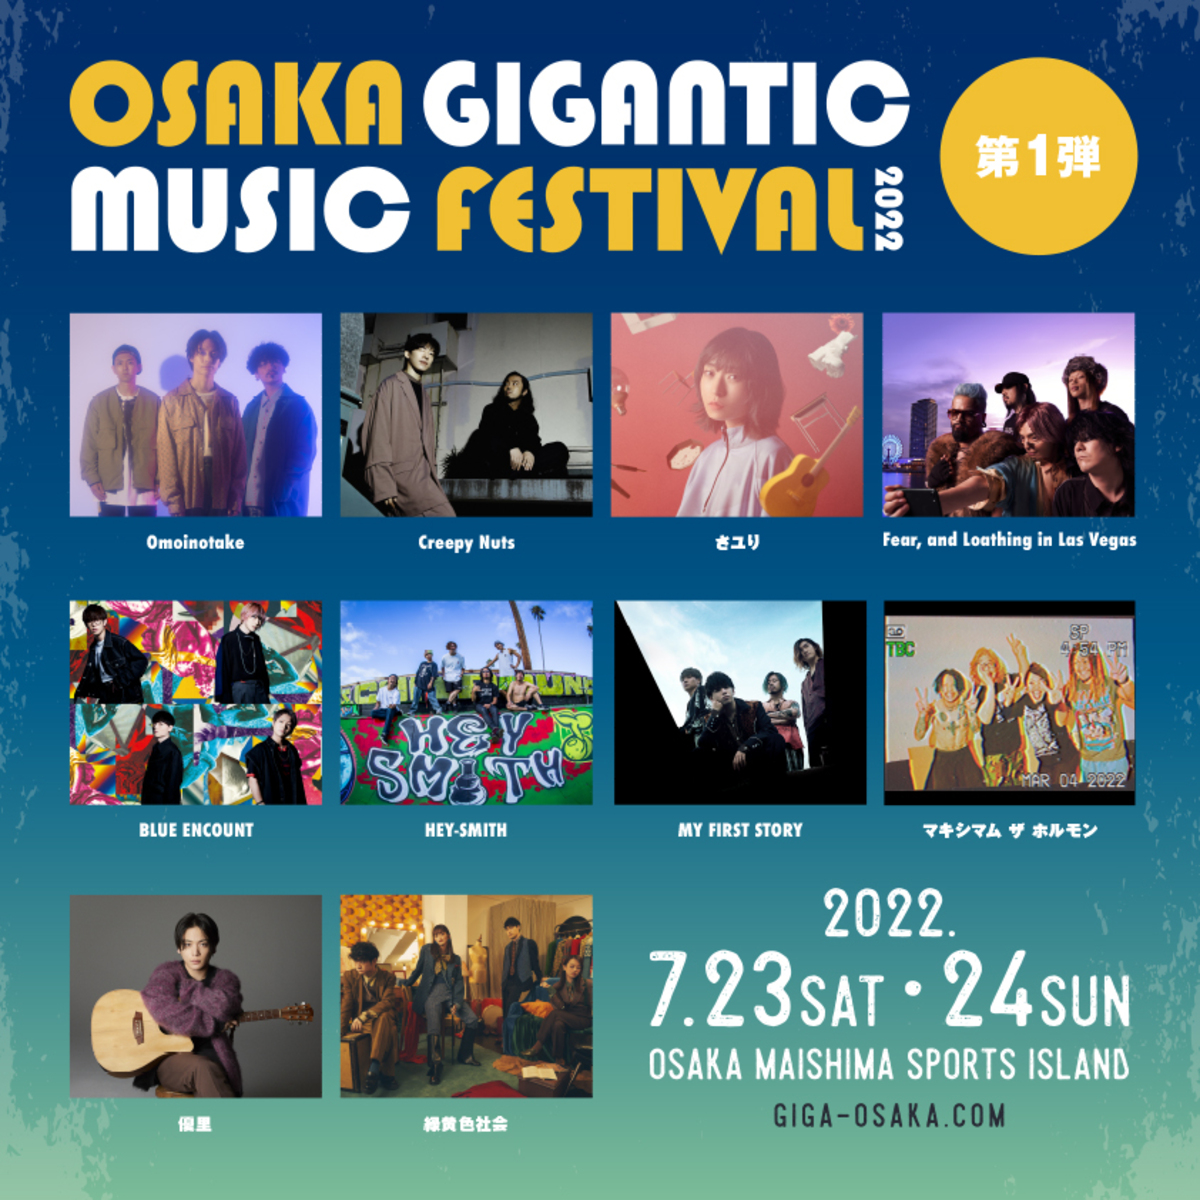 Osaka Gigantic Music Festival 22 第1弾出演者でマキシマム ザ ホルモン Fear And Loathing In Las Vegas Hey Smith Blue Encountら発表 激ロック ニュース